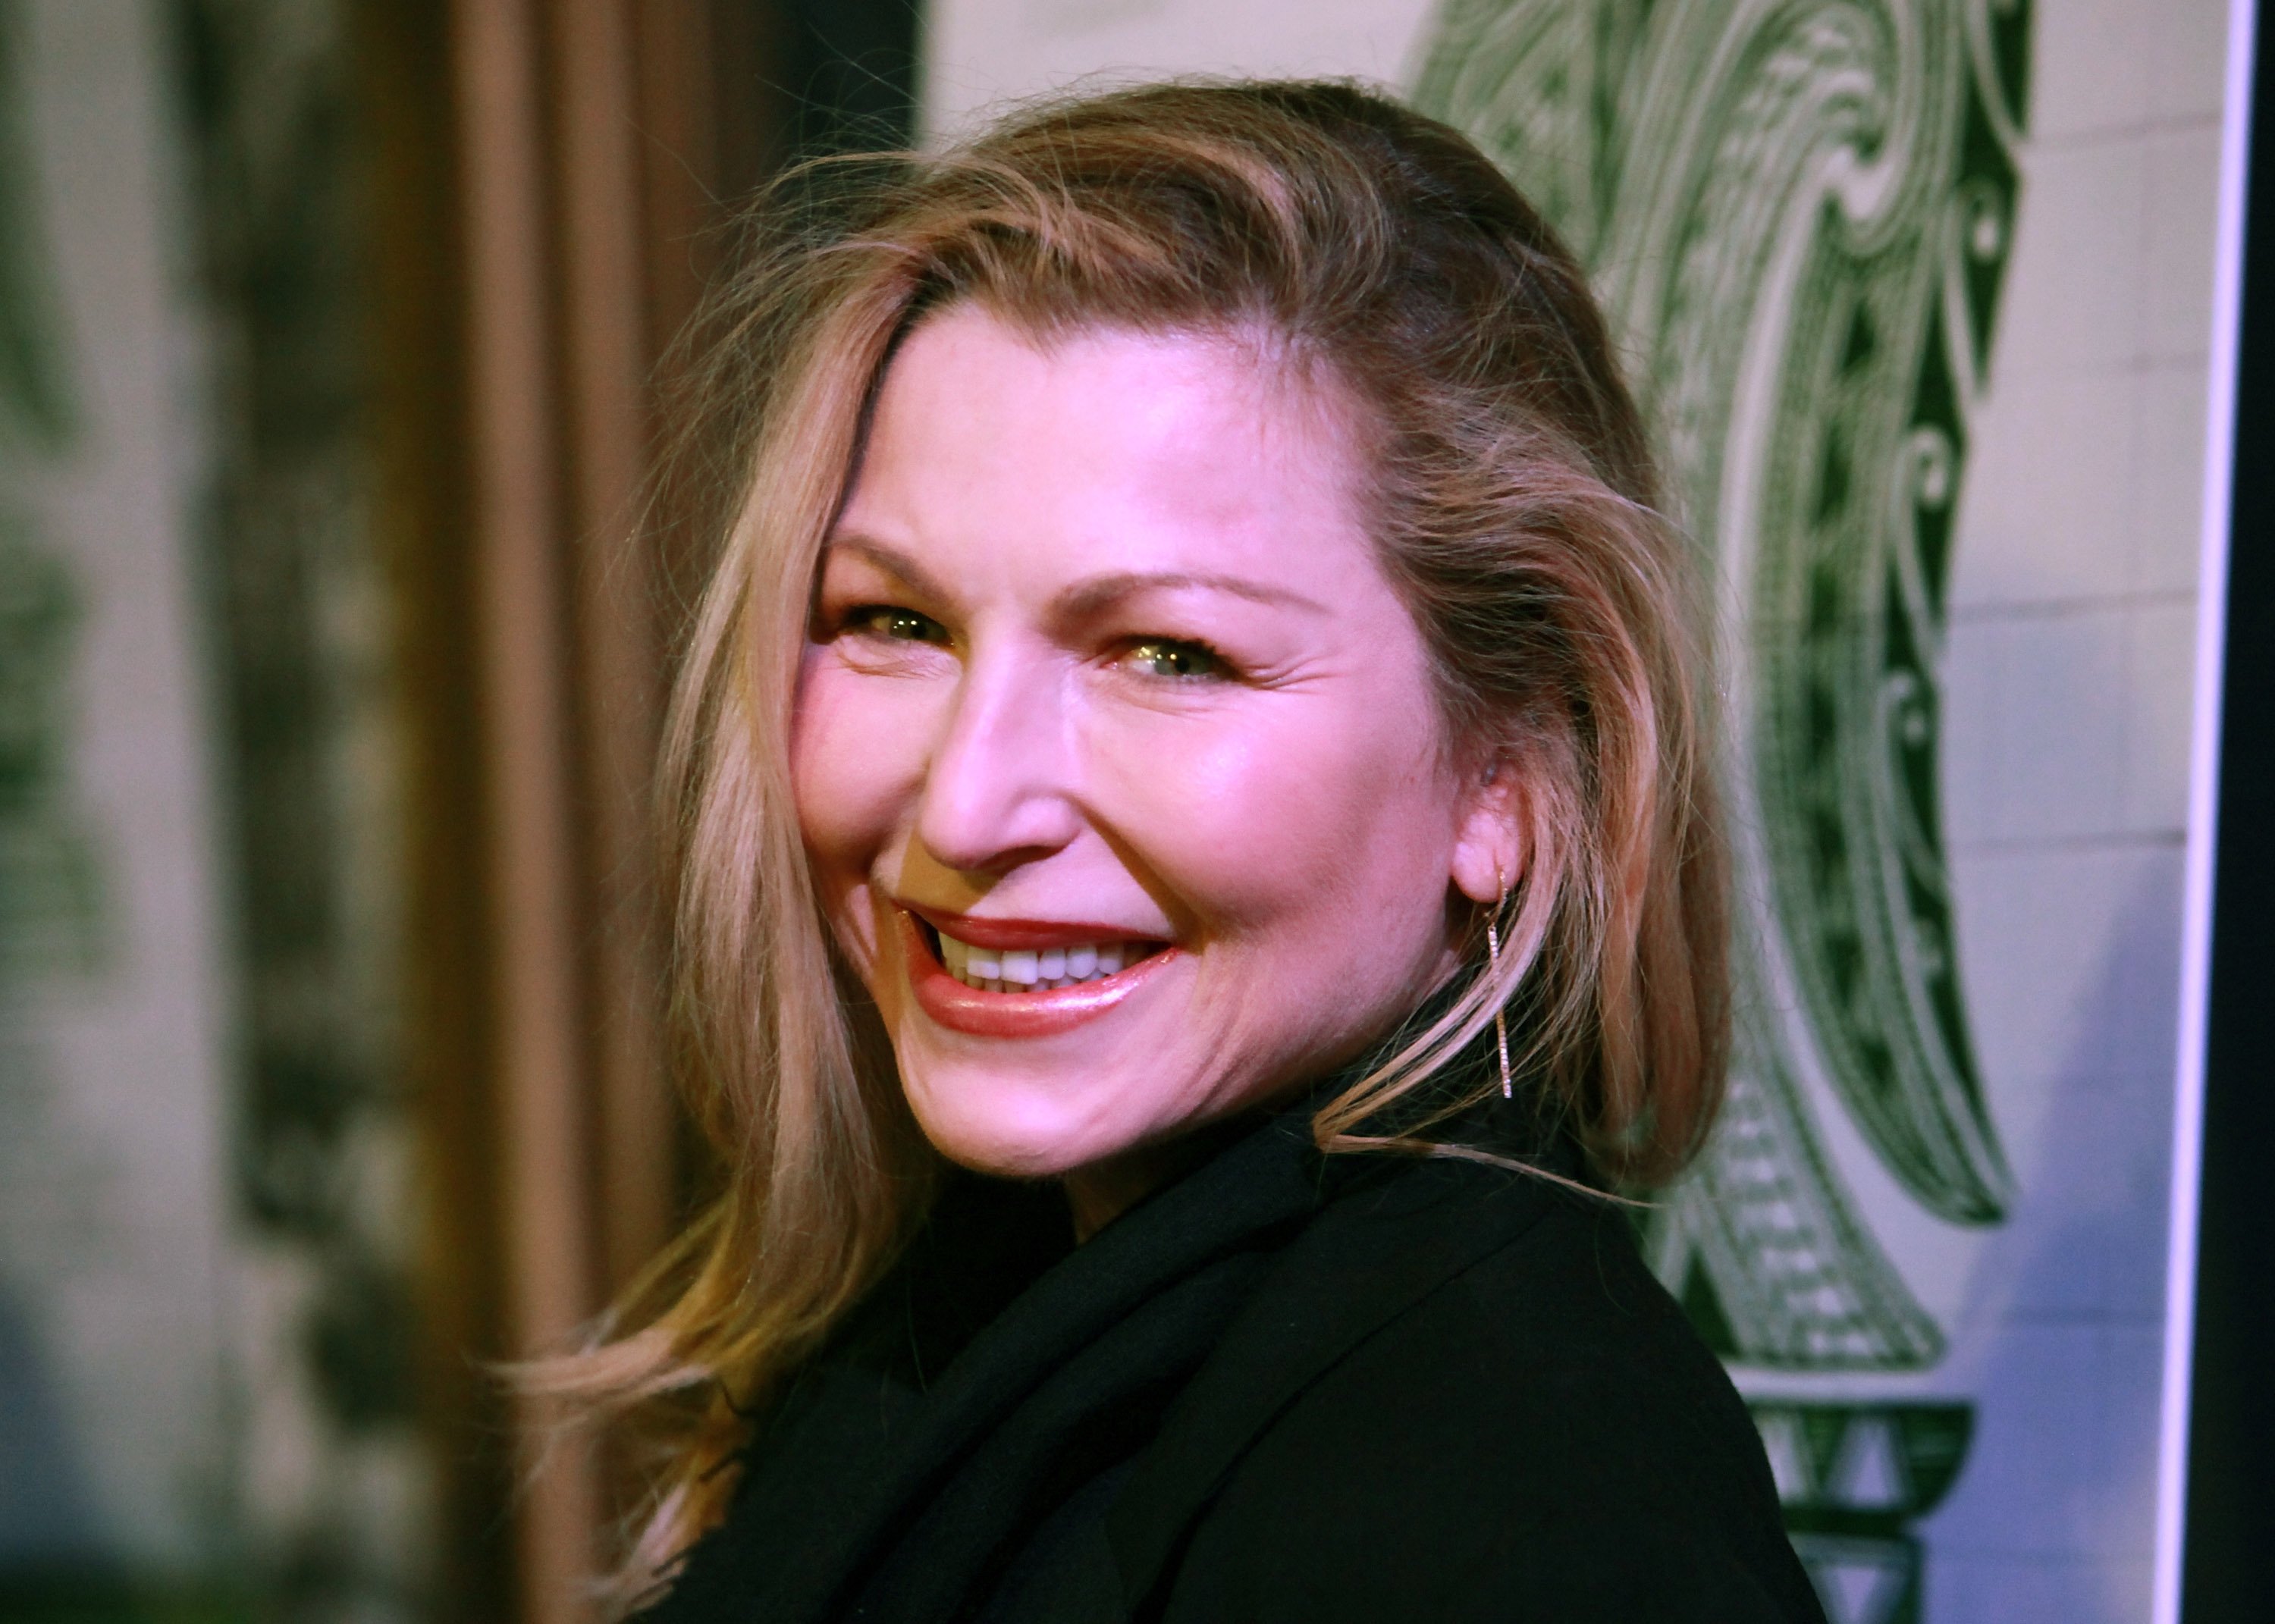 Tatum O'Neal attends the premiere of Broad Green Pictures' "The Dark Horse" at The Theatre at Ace Hotel on March 30, 2016 in Los Angeles, California. | Photo: Getty Images